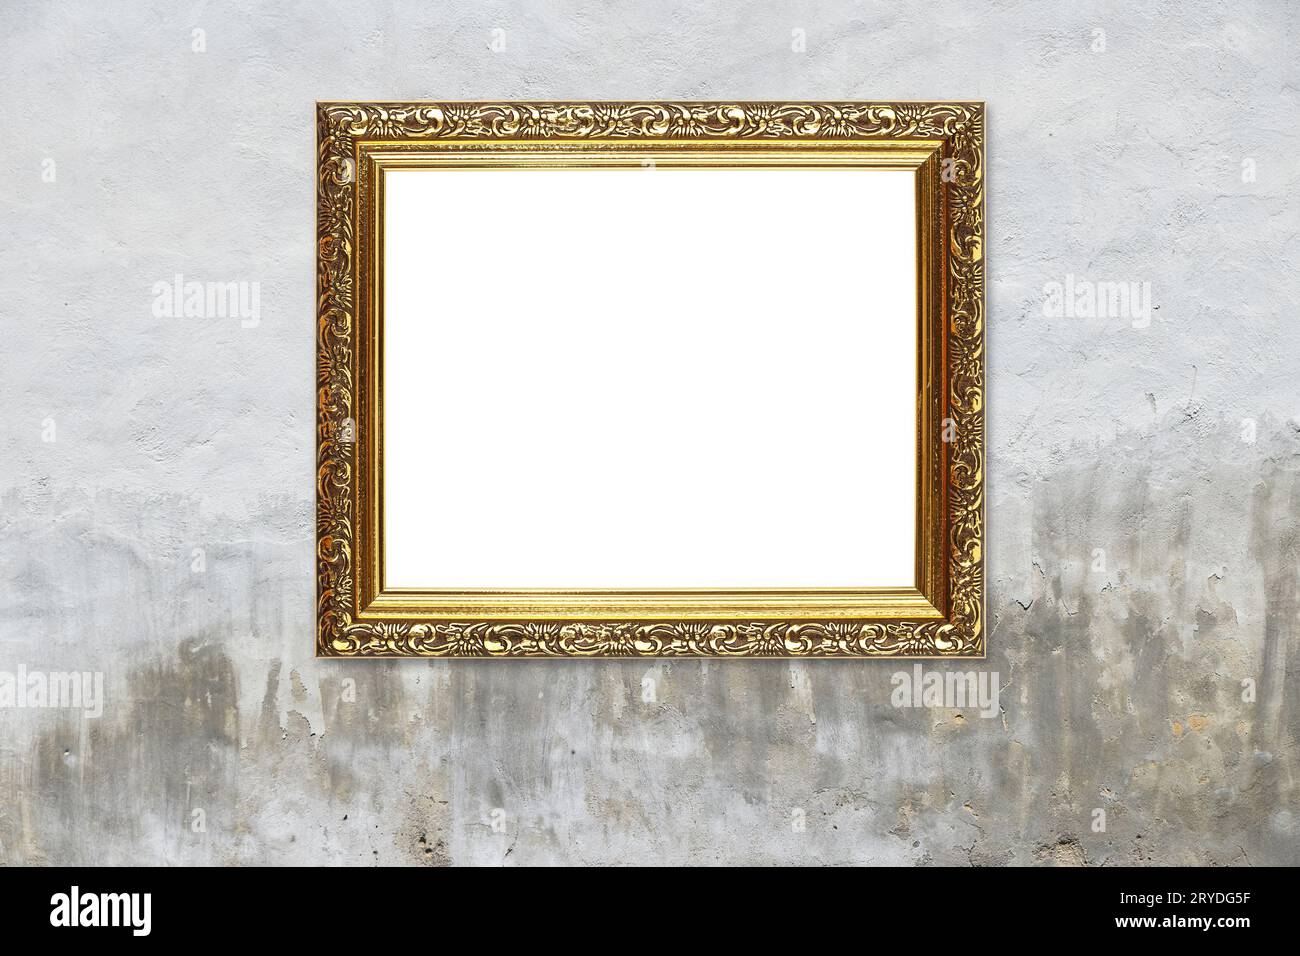 White Landscape Frame With Ornate Wooden Edges Stock Photo - Alamy